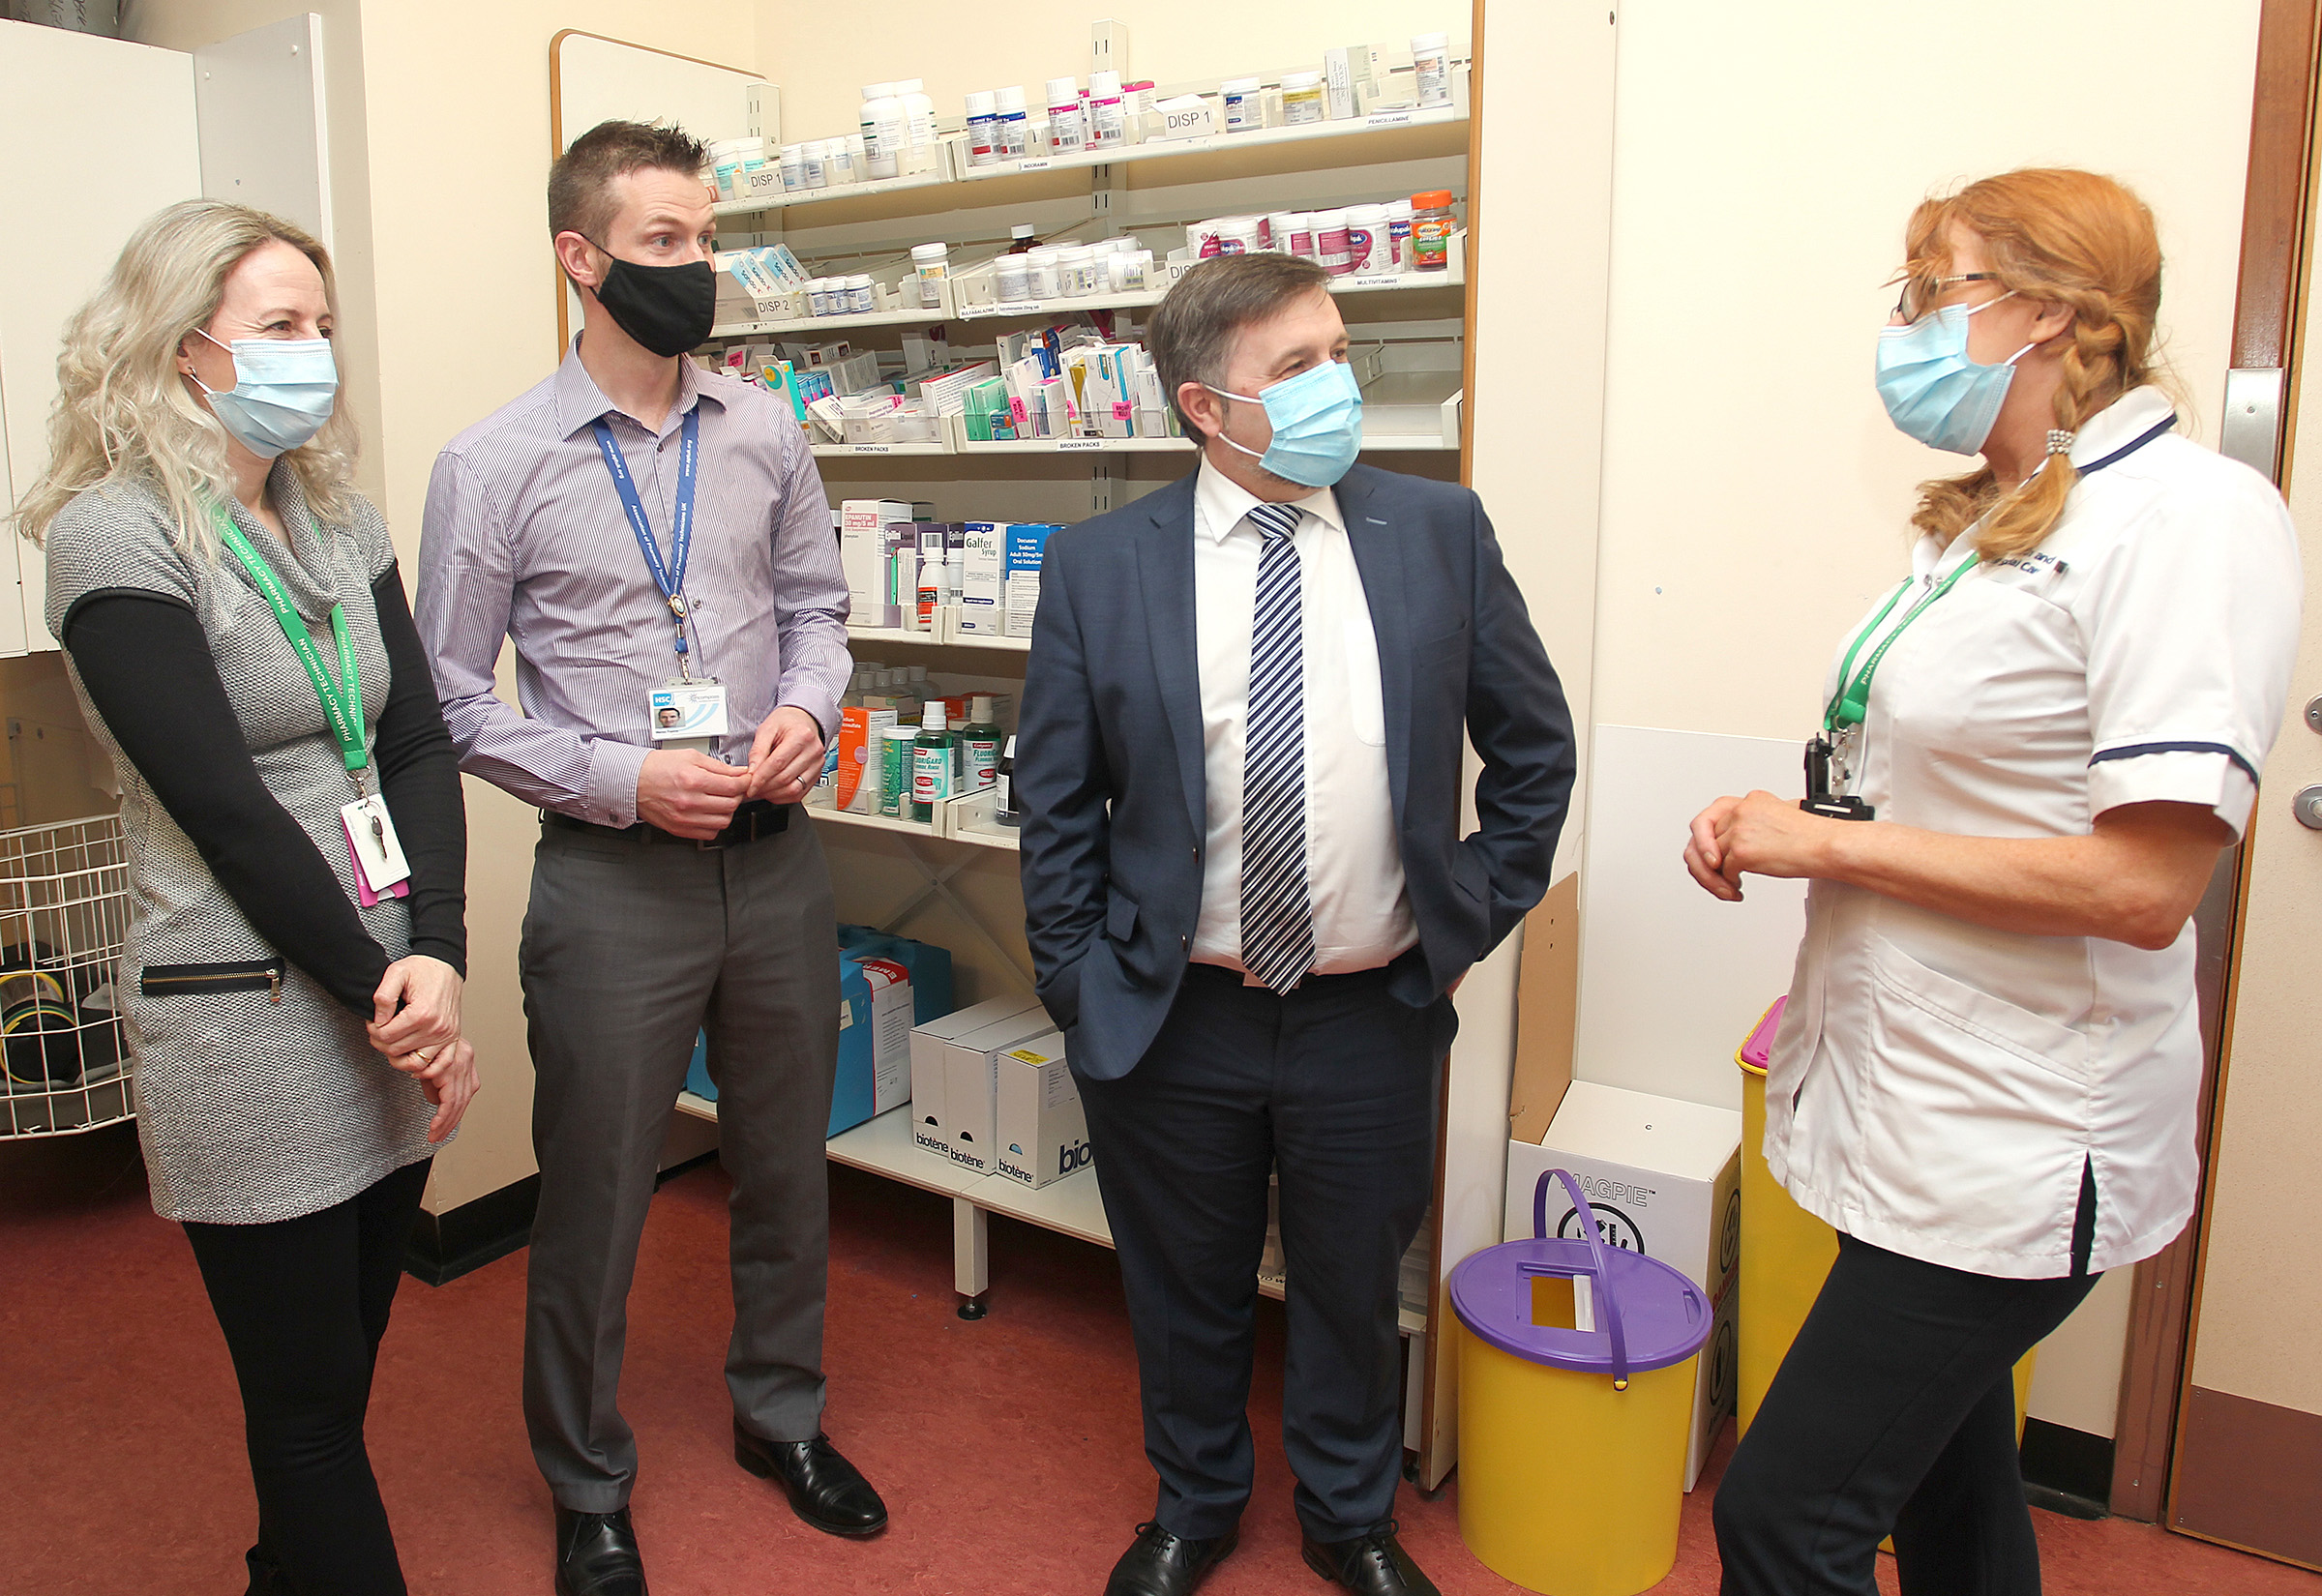 Health Minister visit to Pharmacy at Mater Hospital